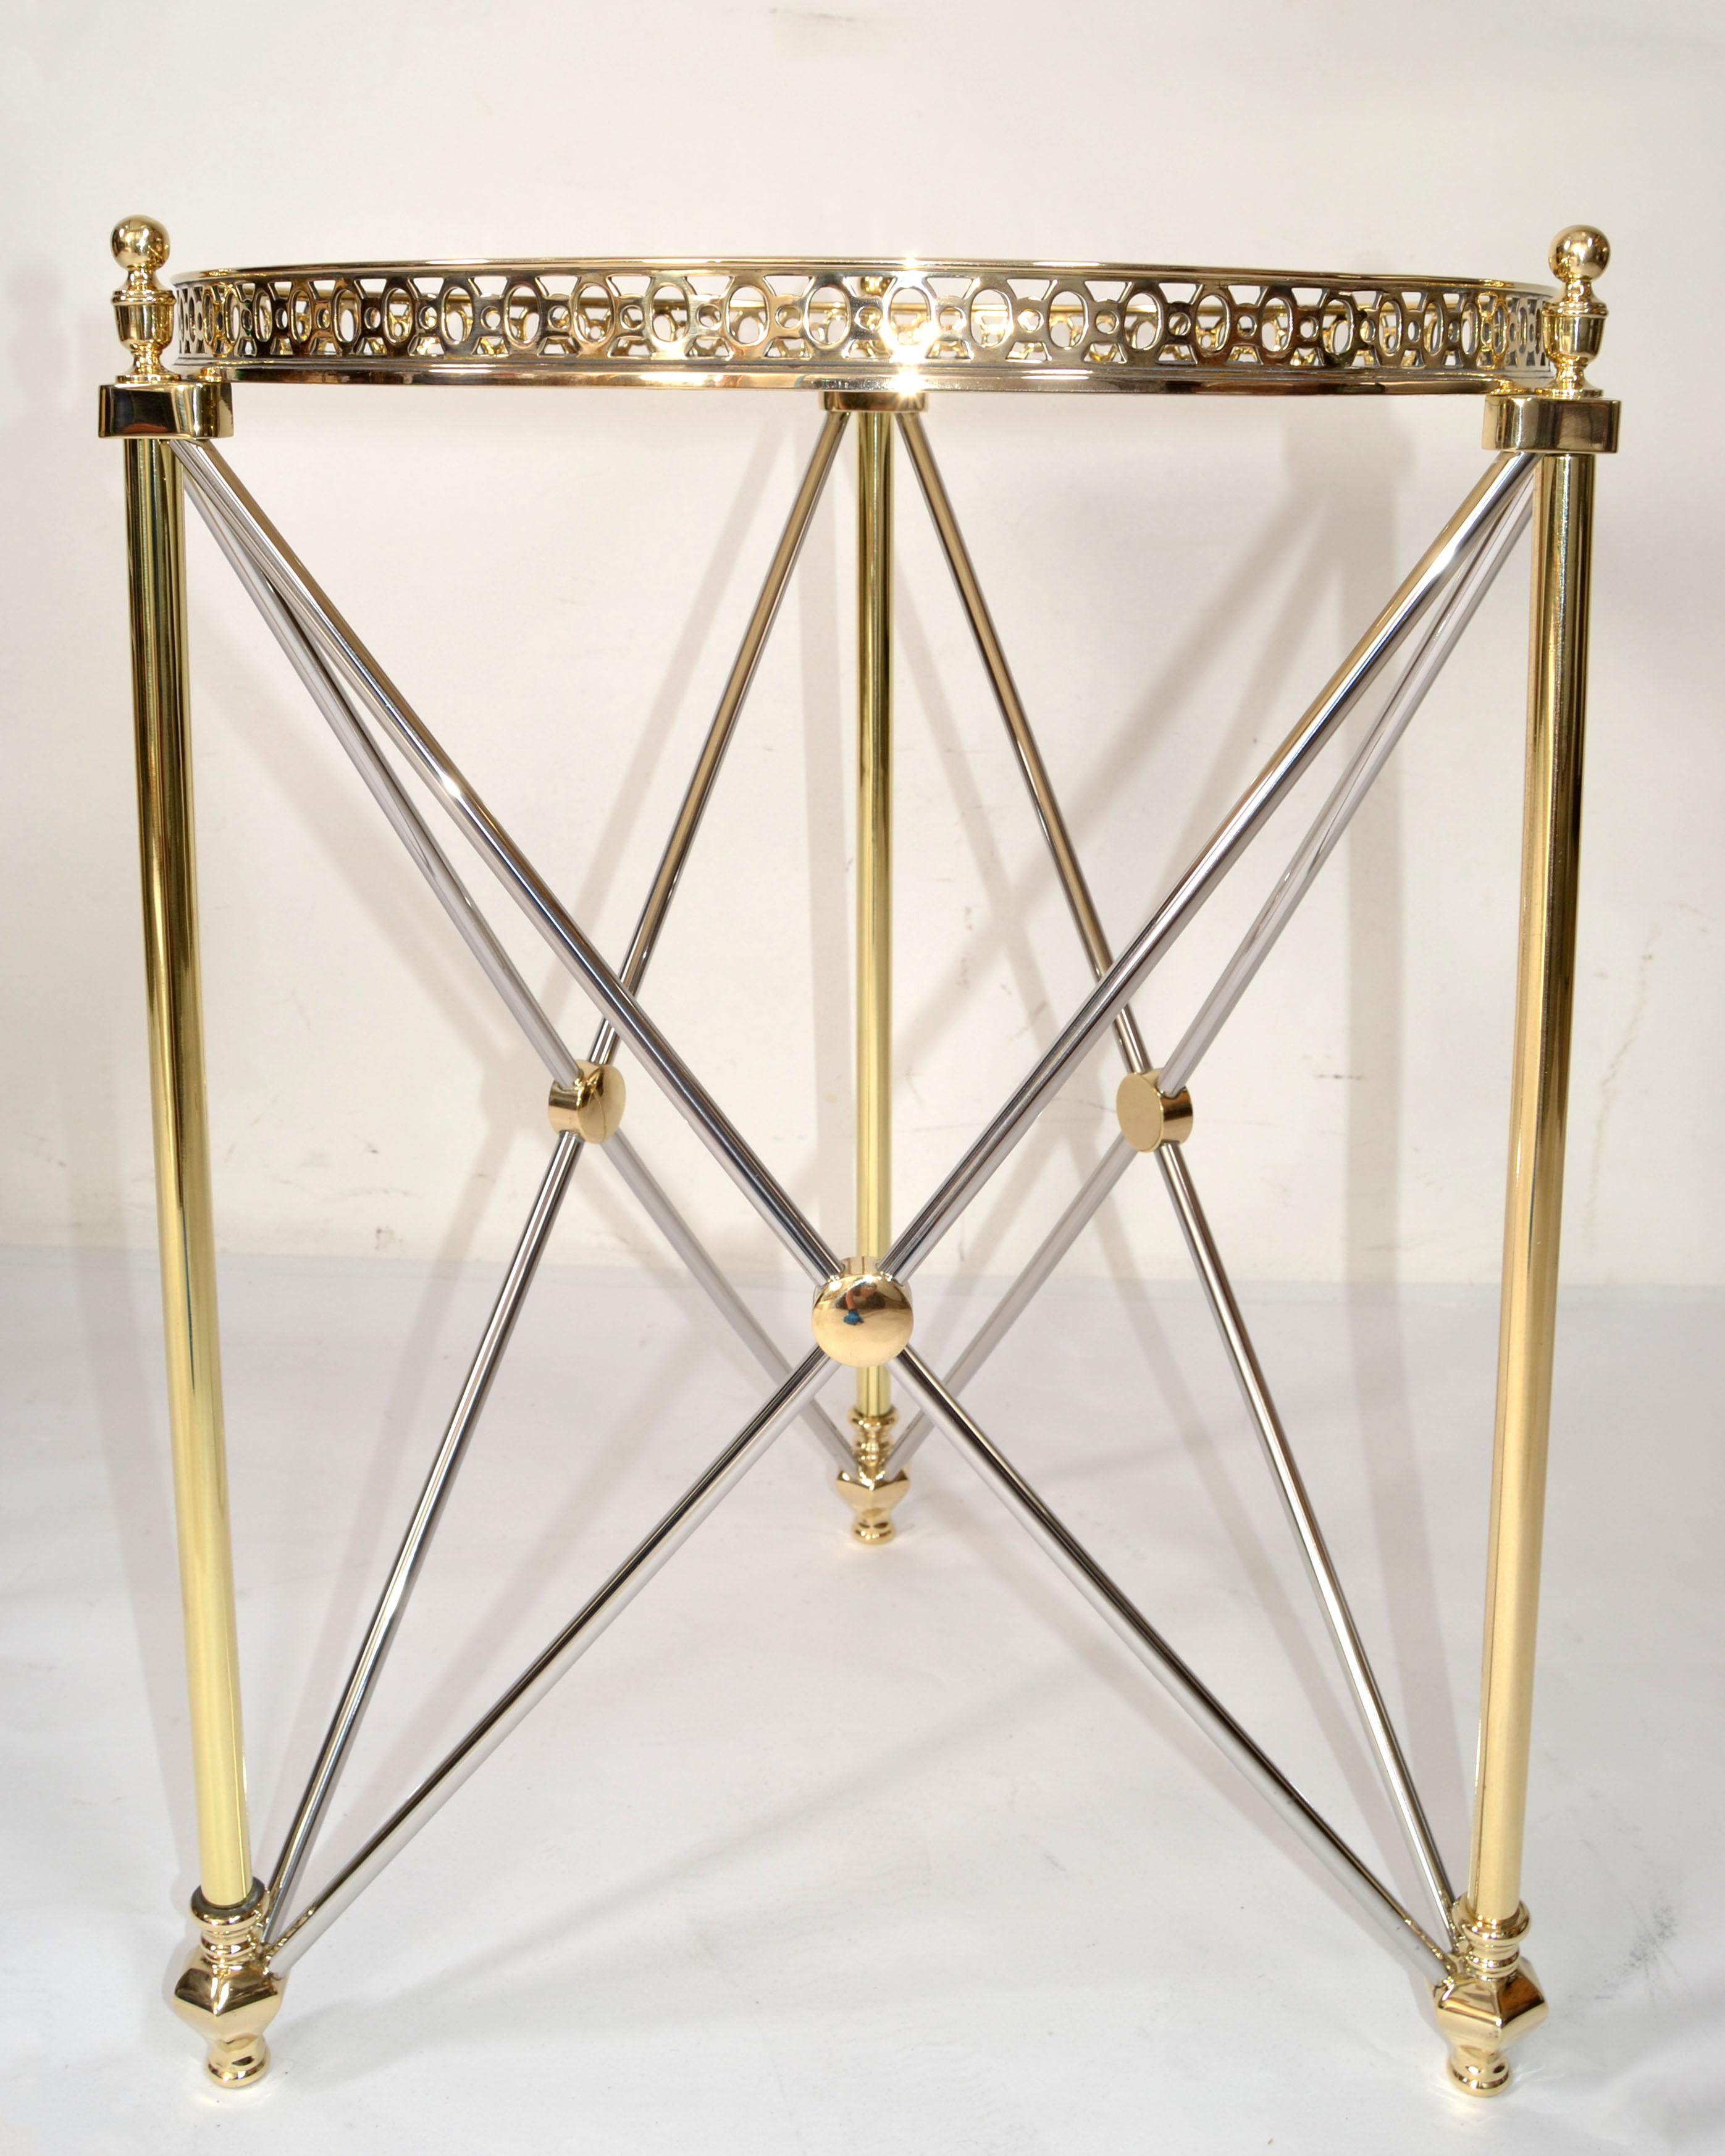 Mid-Century Modern French Maison Jansen Style Brass, Chrome Side, End or Drink Table with attached round Tray Top. 
Brass Finial Decor at the Center where the sculptural Base and Top frame connects.
The silver stretchers are made out of Chrome and